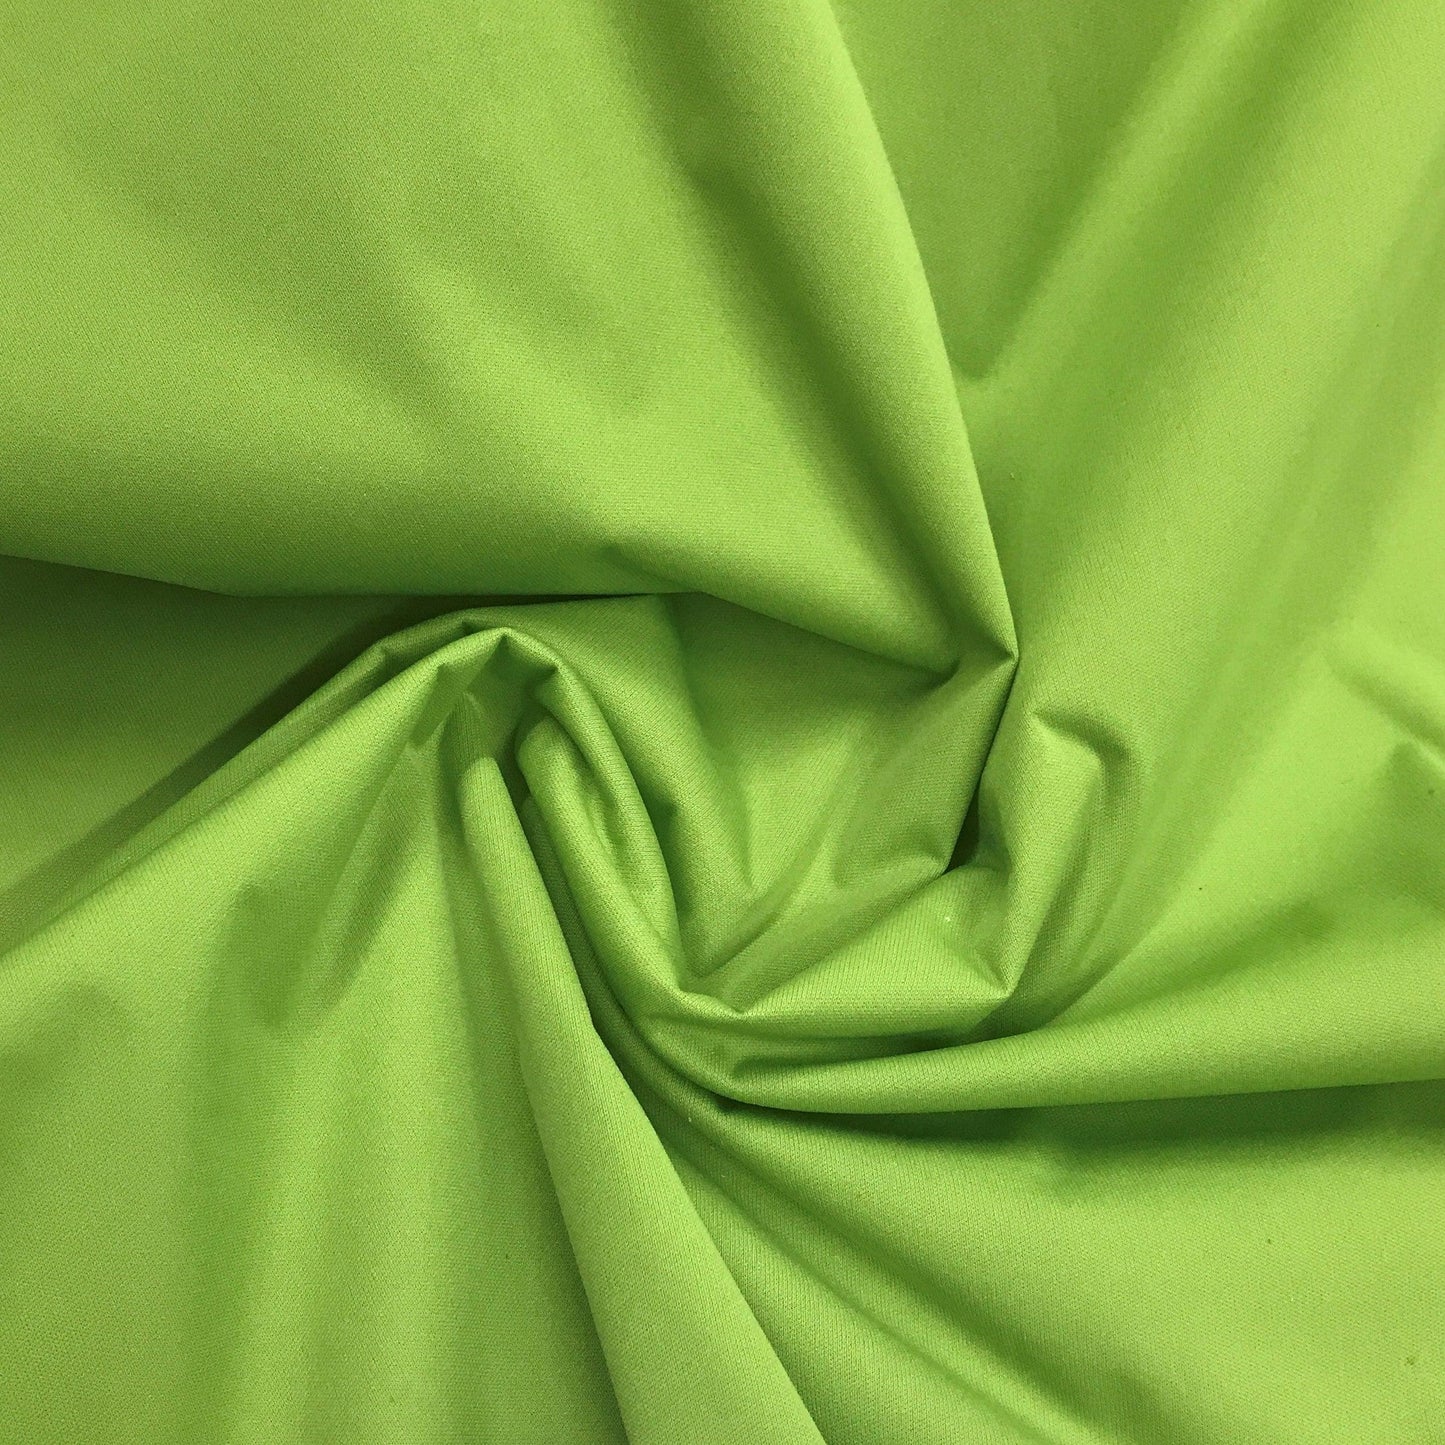 Meadow 1 mil PUL Fabric - Made in the USA - Nature's Fabrics